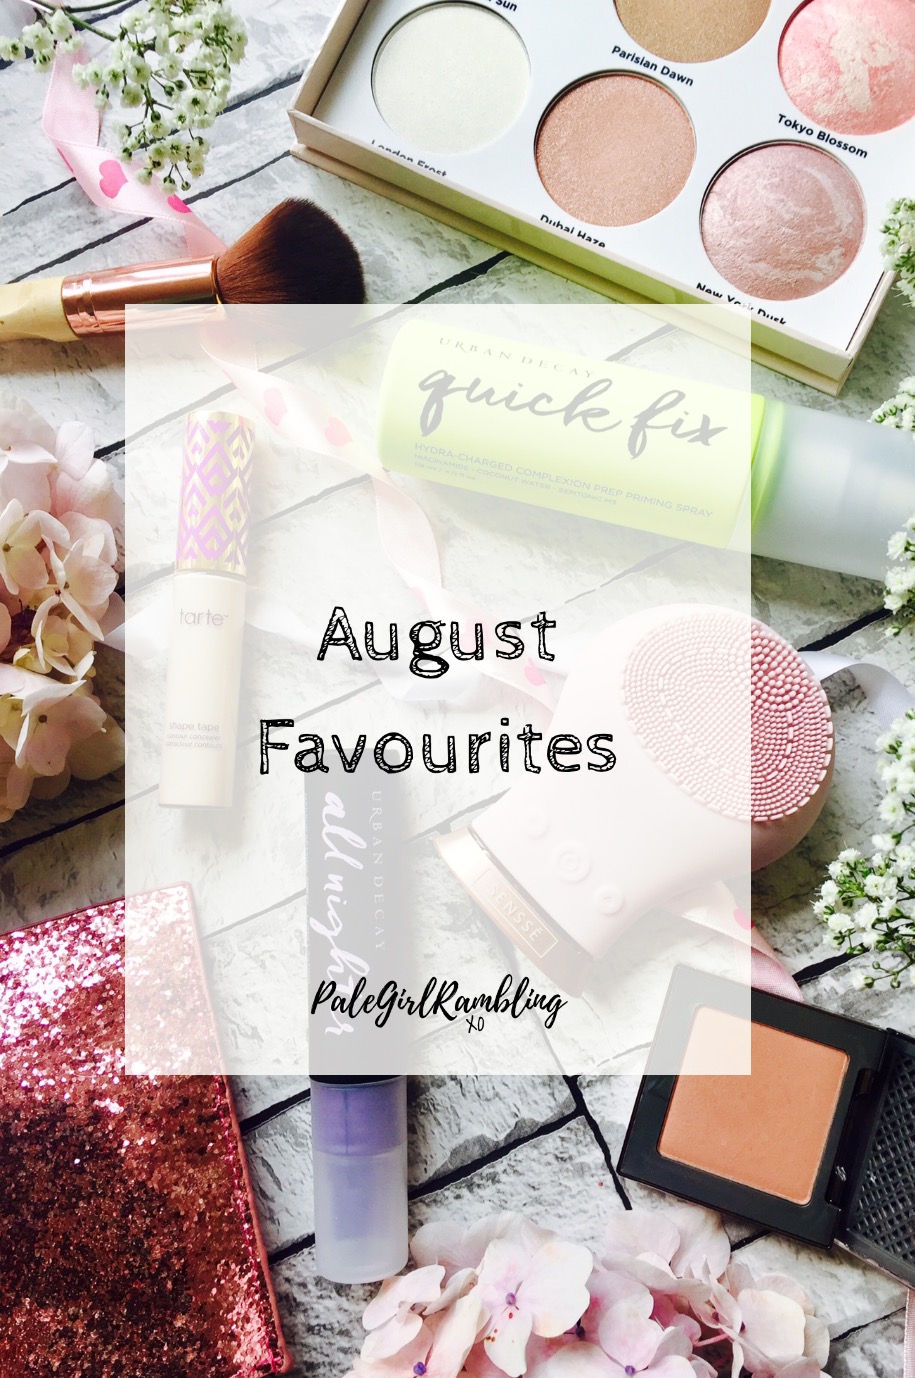 August favourites 2017 Urban Decay all Nighter setting spray prep and Priming spray Senssē facial cleanser ahb highlight and Strobe kit Tarte Shape Tape afterglow blush